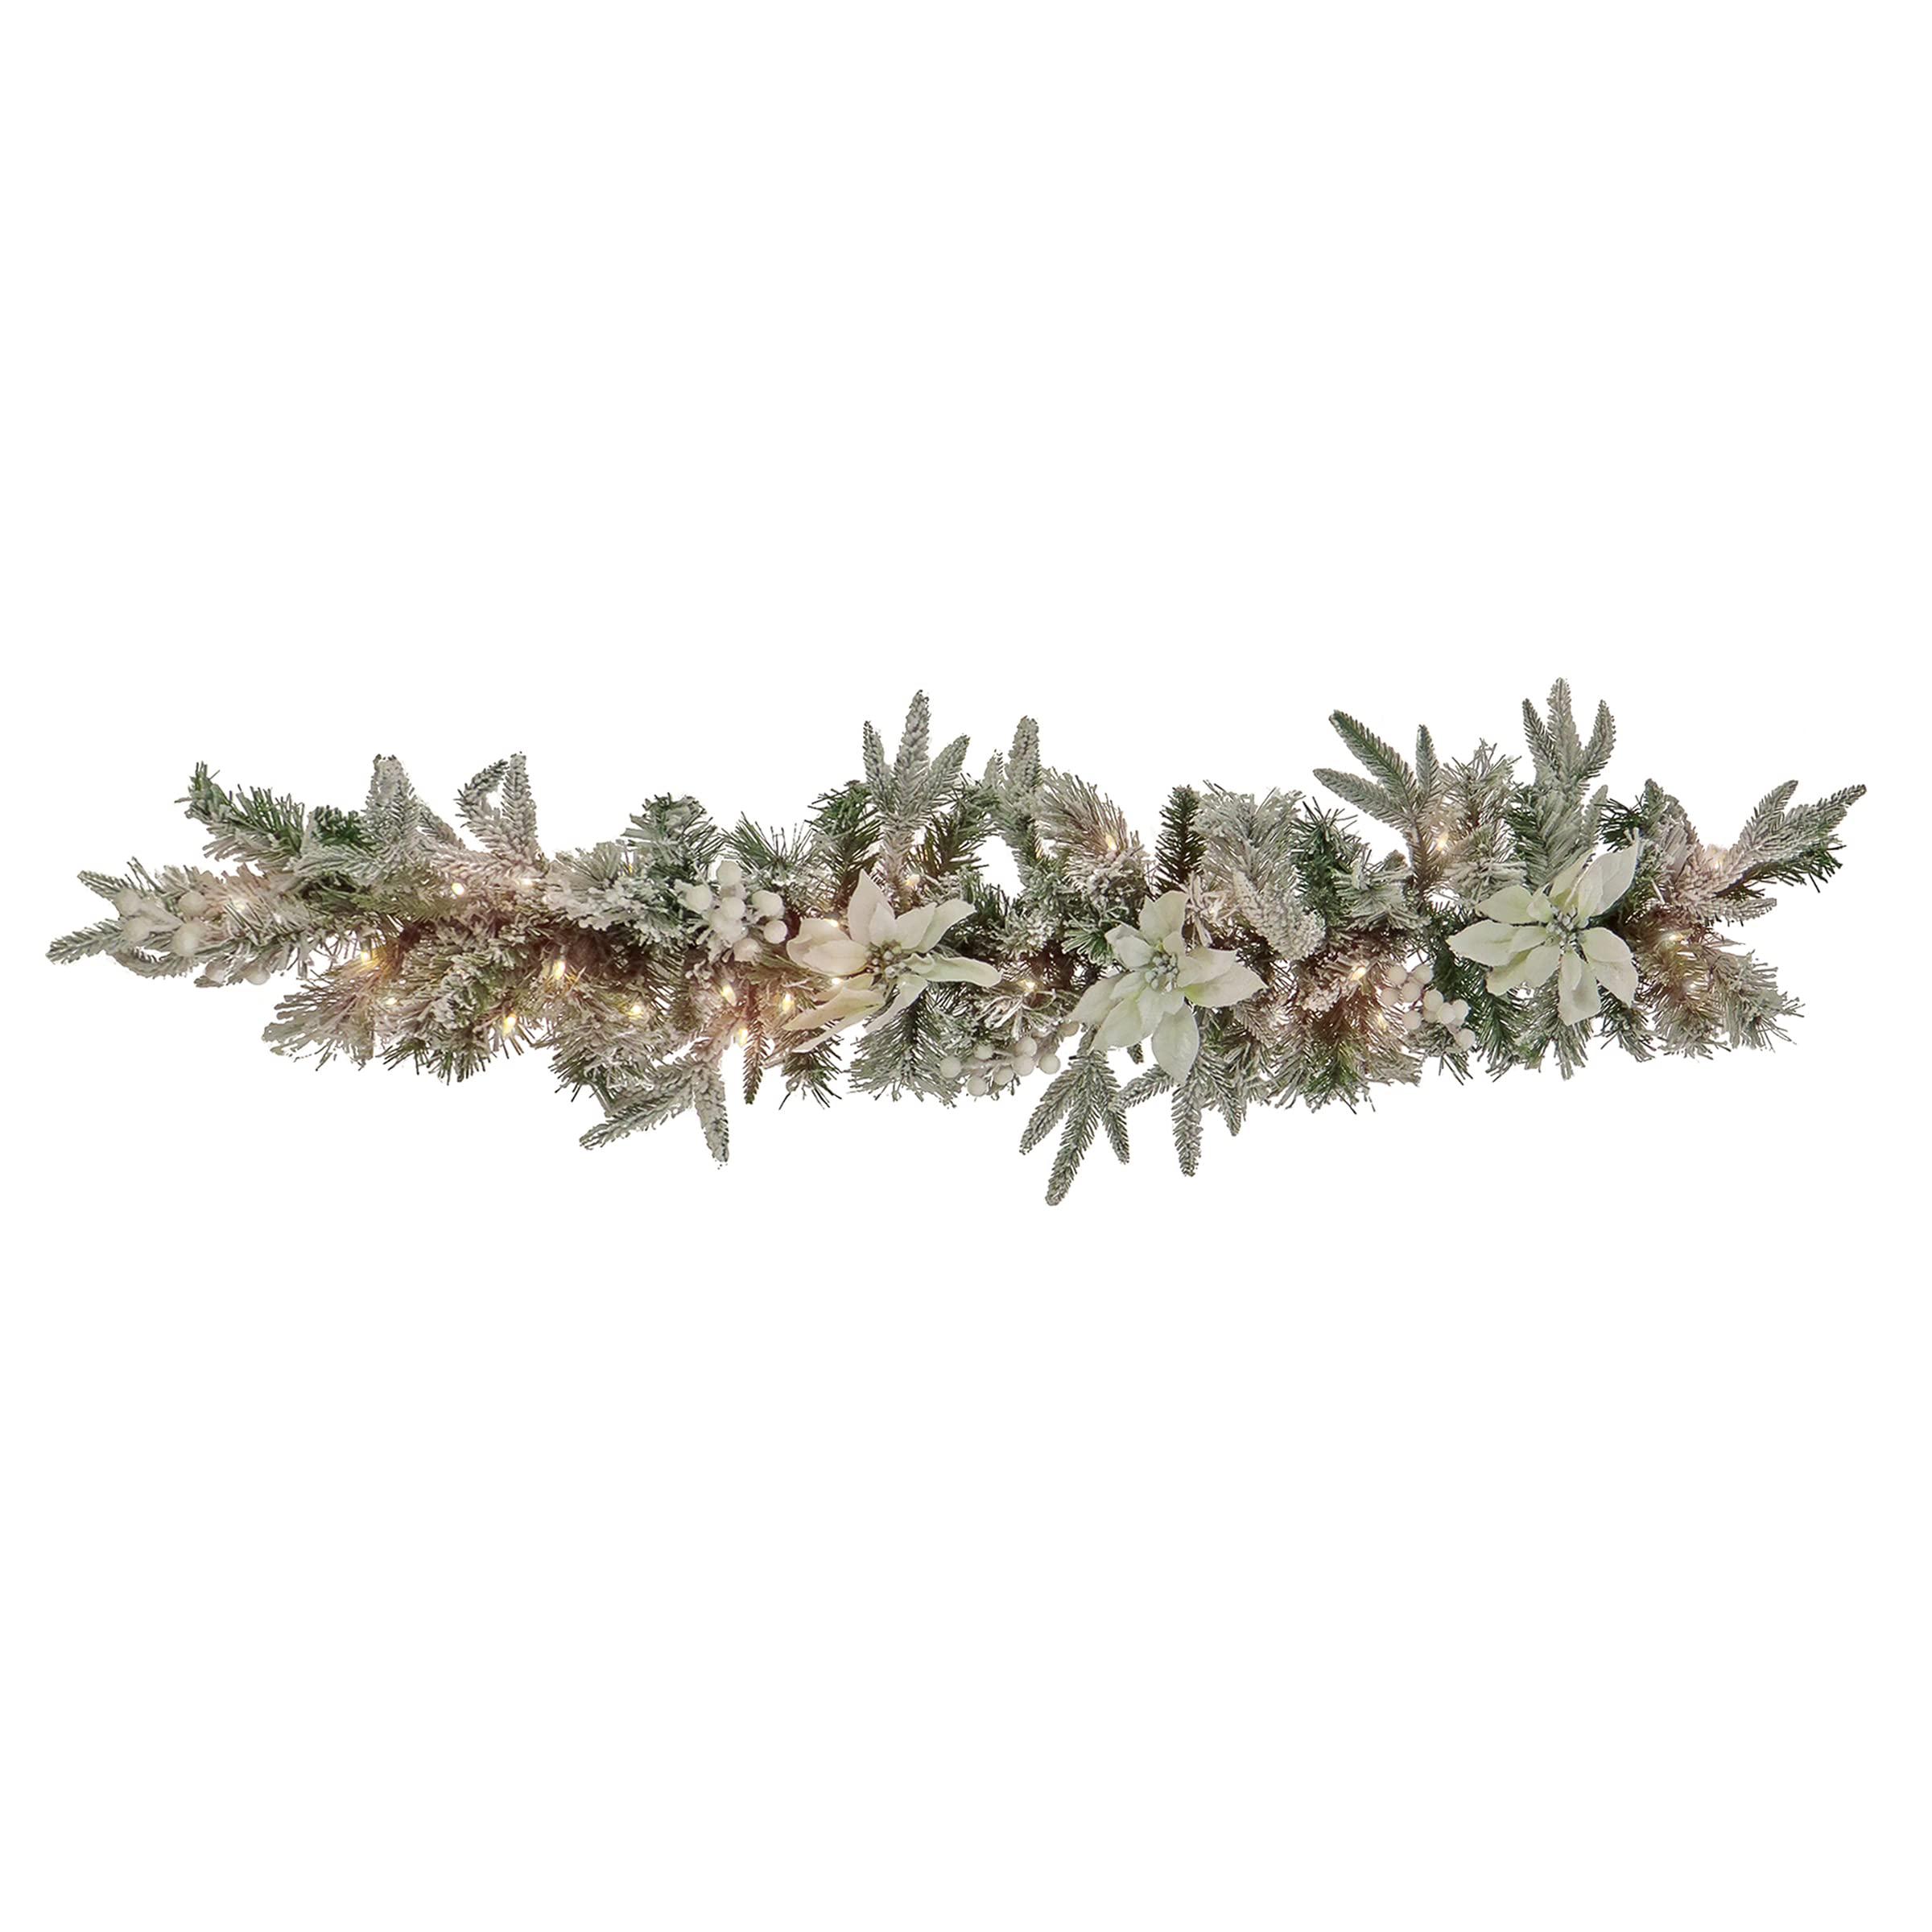 national tree company pre lit artificial garland, green, frosted, decorated with berry clusters, flower blooms, warm white le